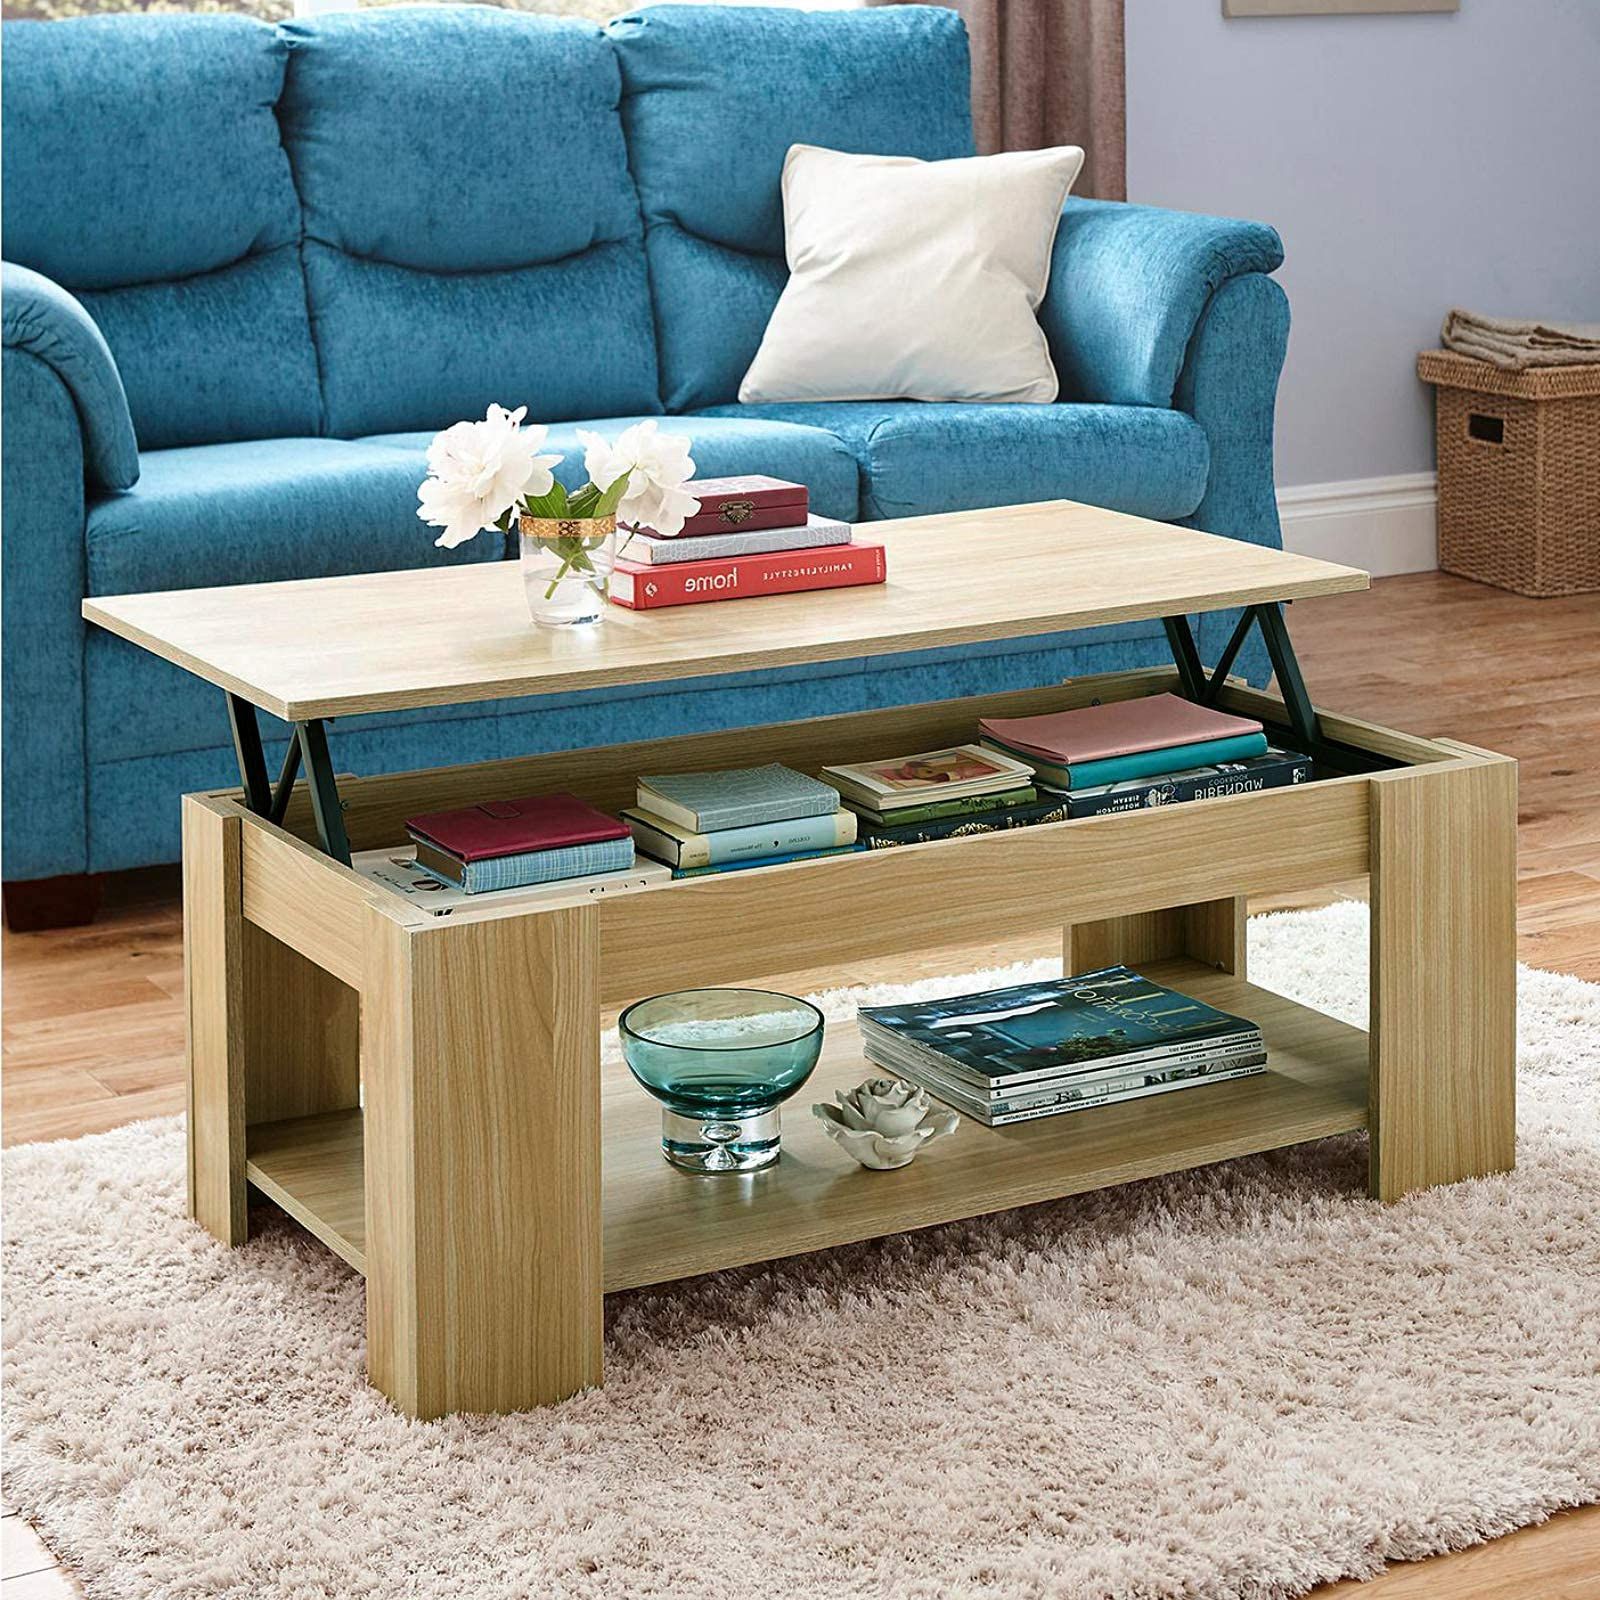 Buy Coffee Table With Storage Lift Up Coffee Table For Living Room Throughout 2020 Modern Coffee Tables With Hidden Storage Compartments (View 10 of 15)